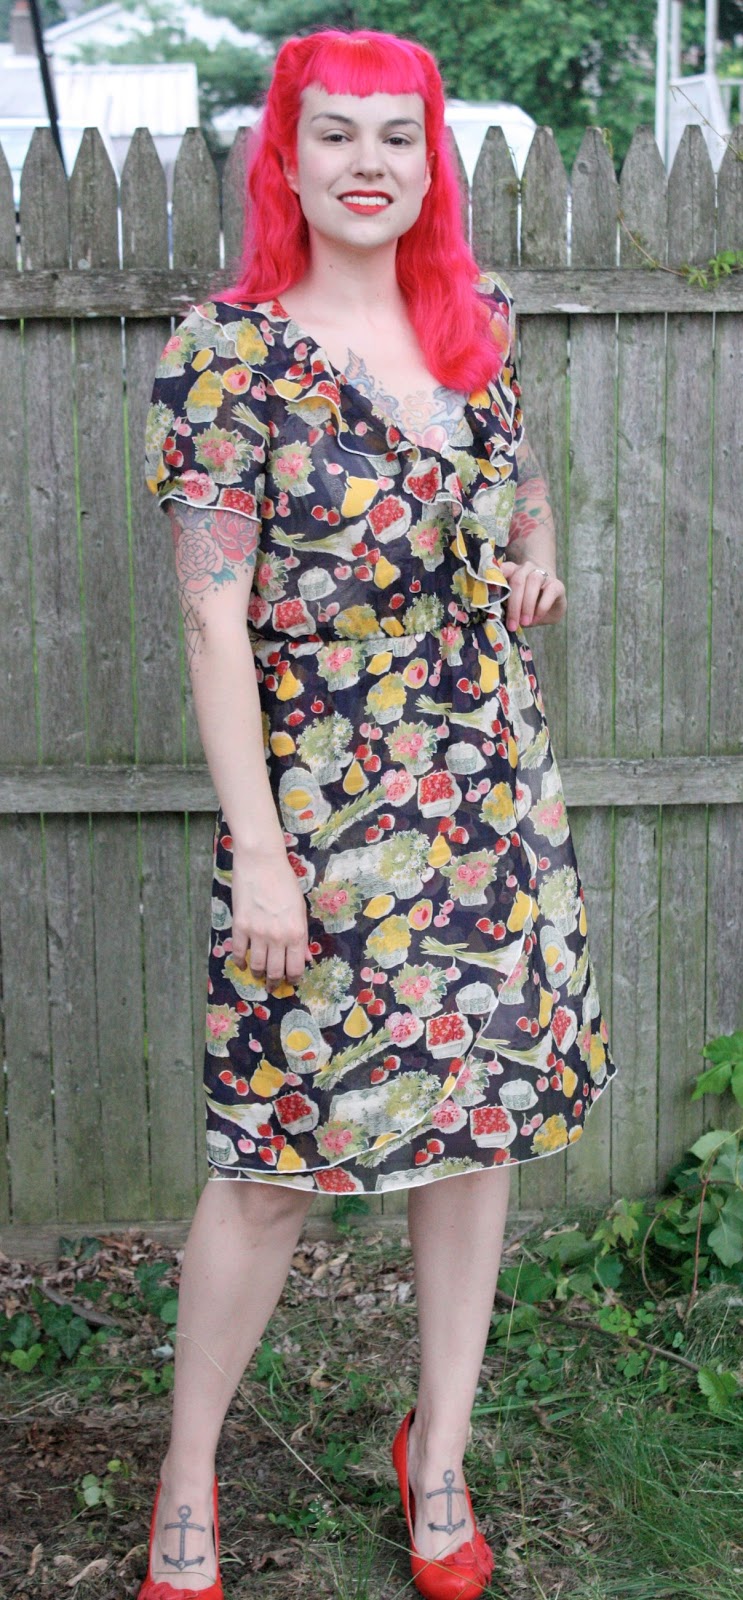 Gertie's New Blog for Better Sewing: Fruity Floral 40s Chiffon Dress